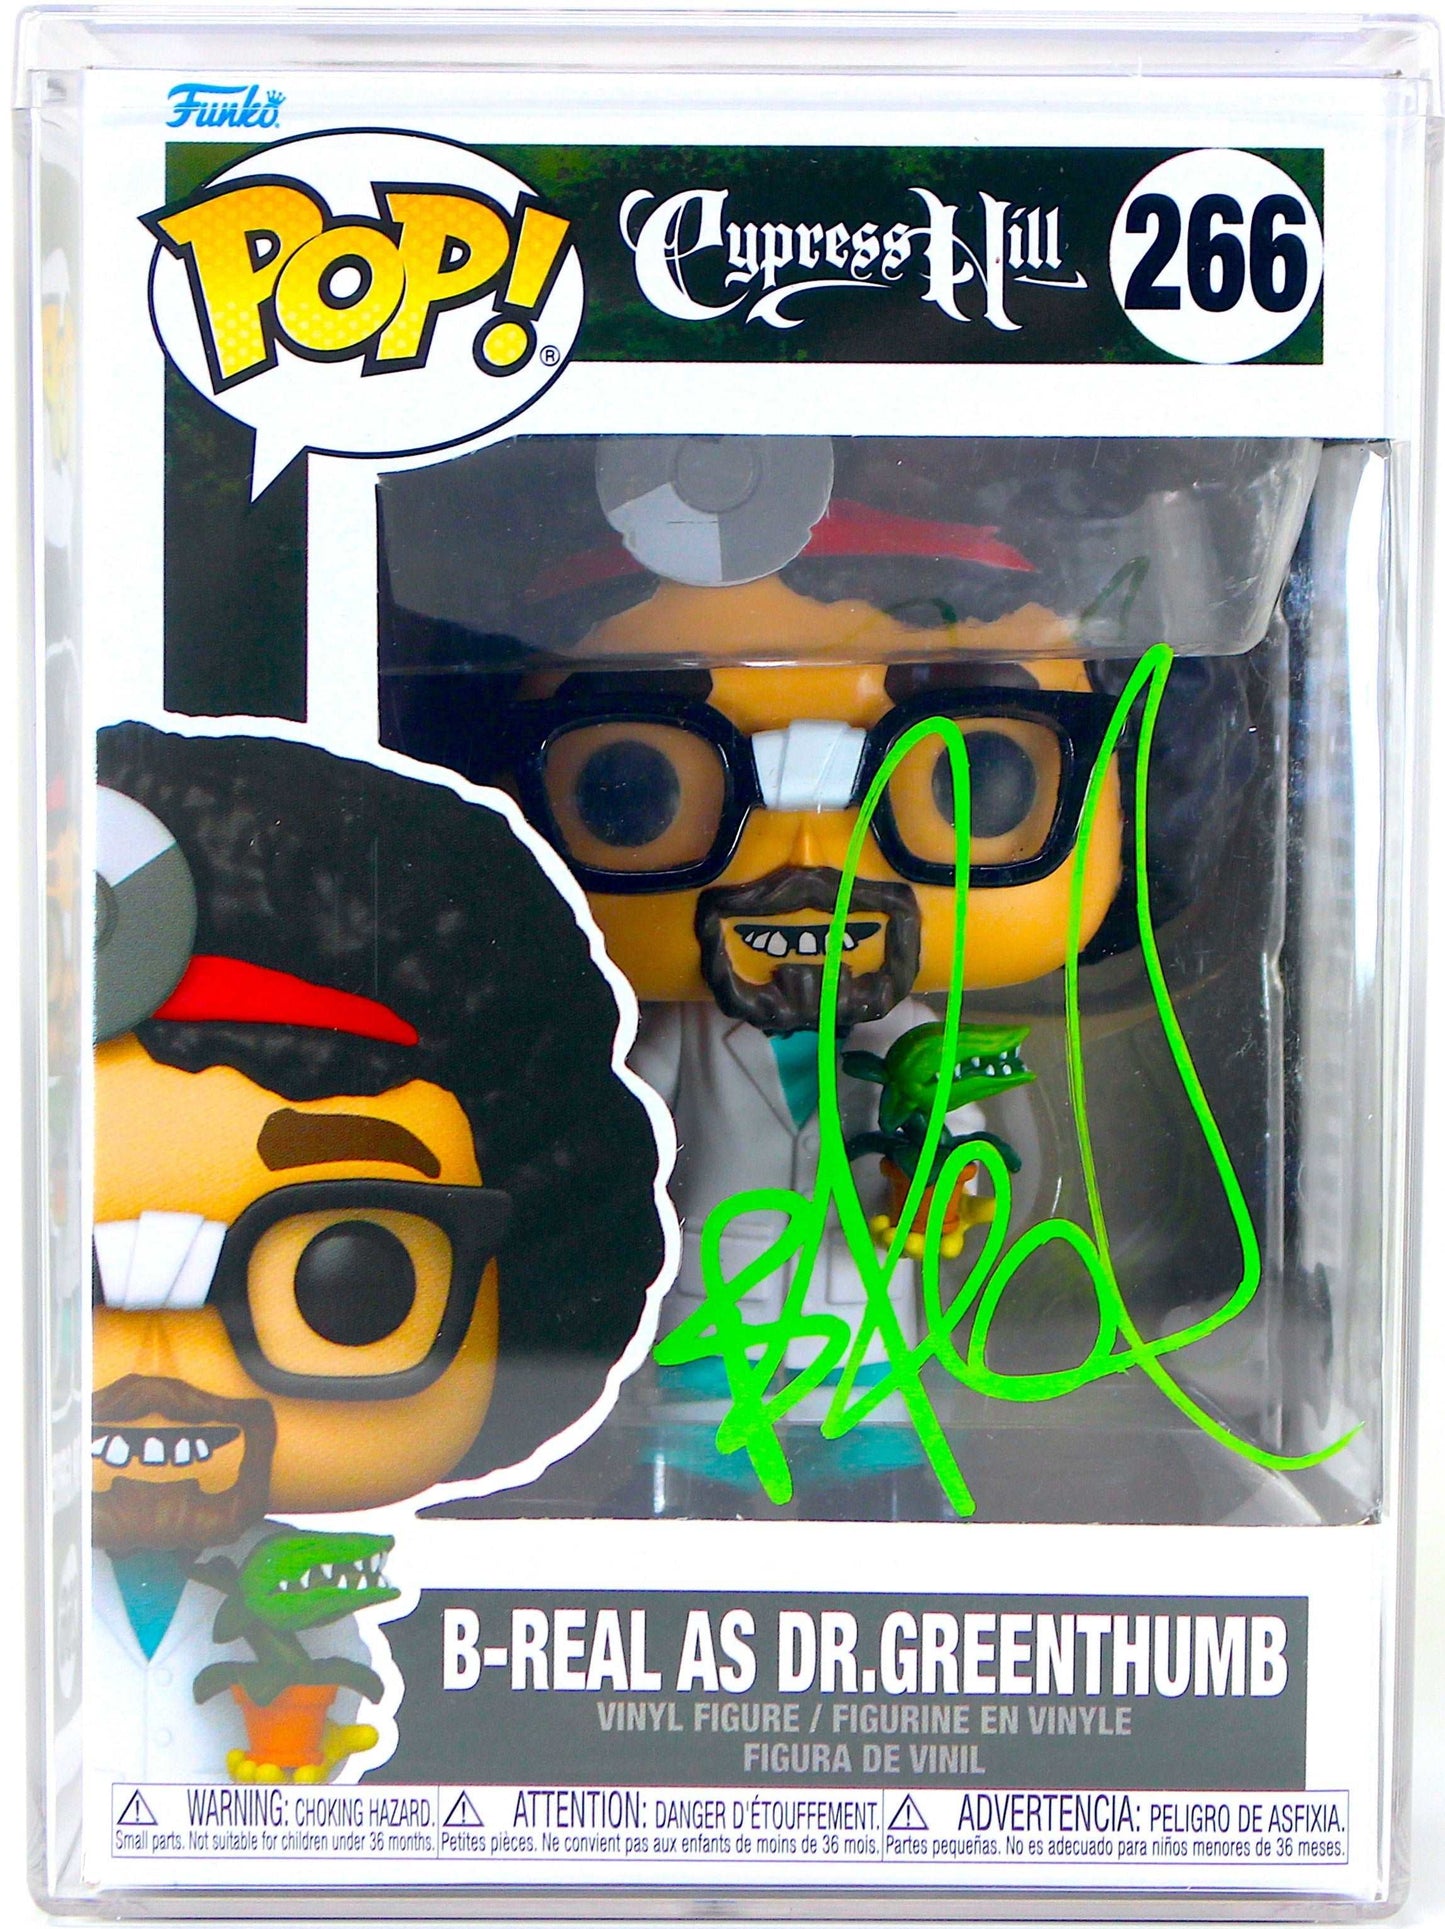 Autographed Signed Cypress Hill B-Real Funko Pop! #266 Signature is Authenticated By Beckett ✅ - DaFunkoShop - Funko Pop! Cypress Hill